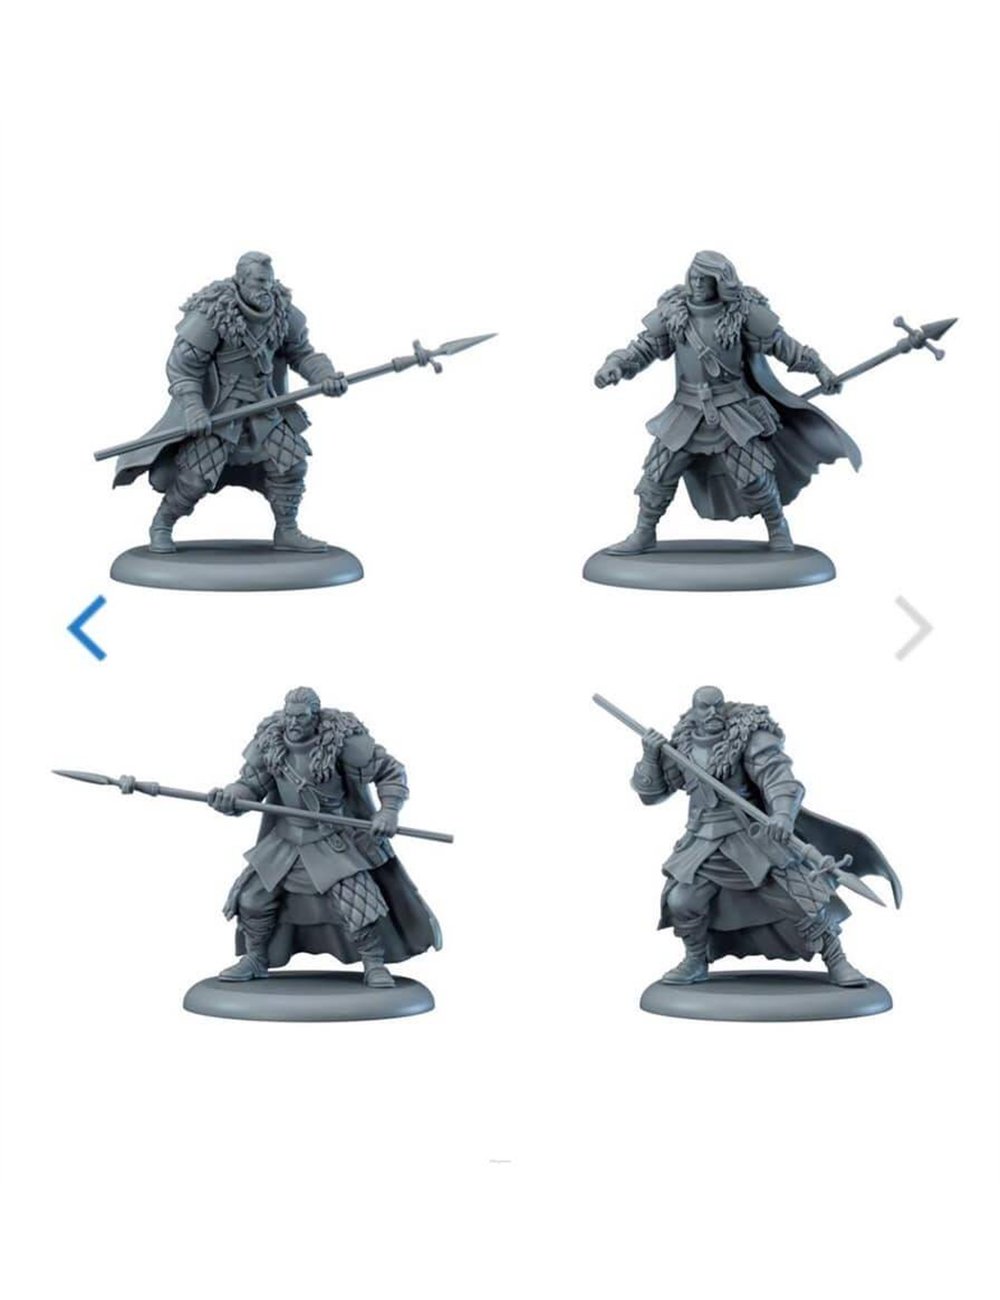 A SONG OF ICE & FIRE - Nights Watch Shadow Tower Spearmen